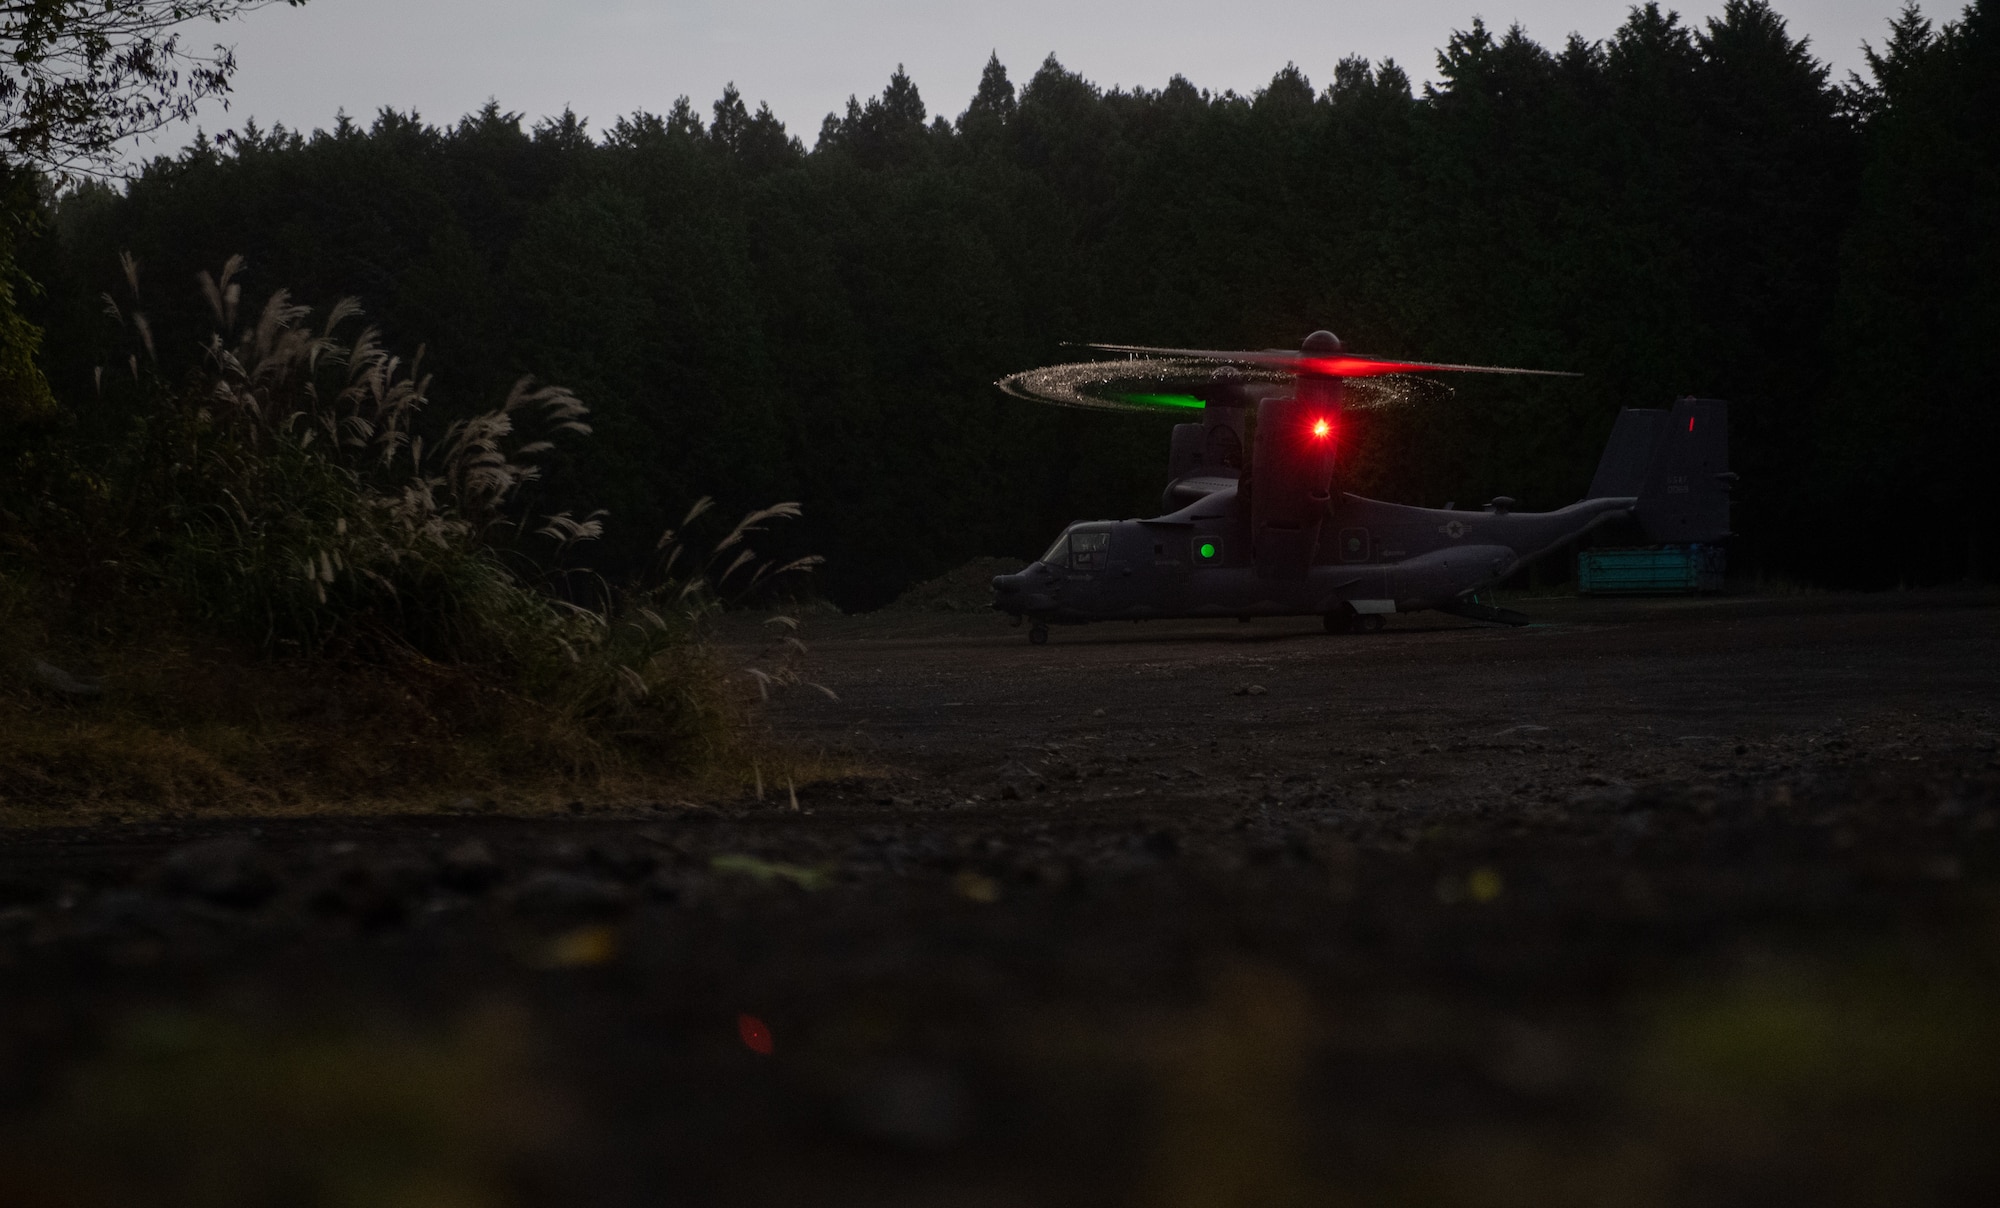 A CV-22 Osprey, assigned to the 353rd Special Operations Group, arrives at a landing zone during a search and rescue training as part of exercise Keen Sword 21